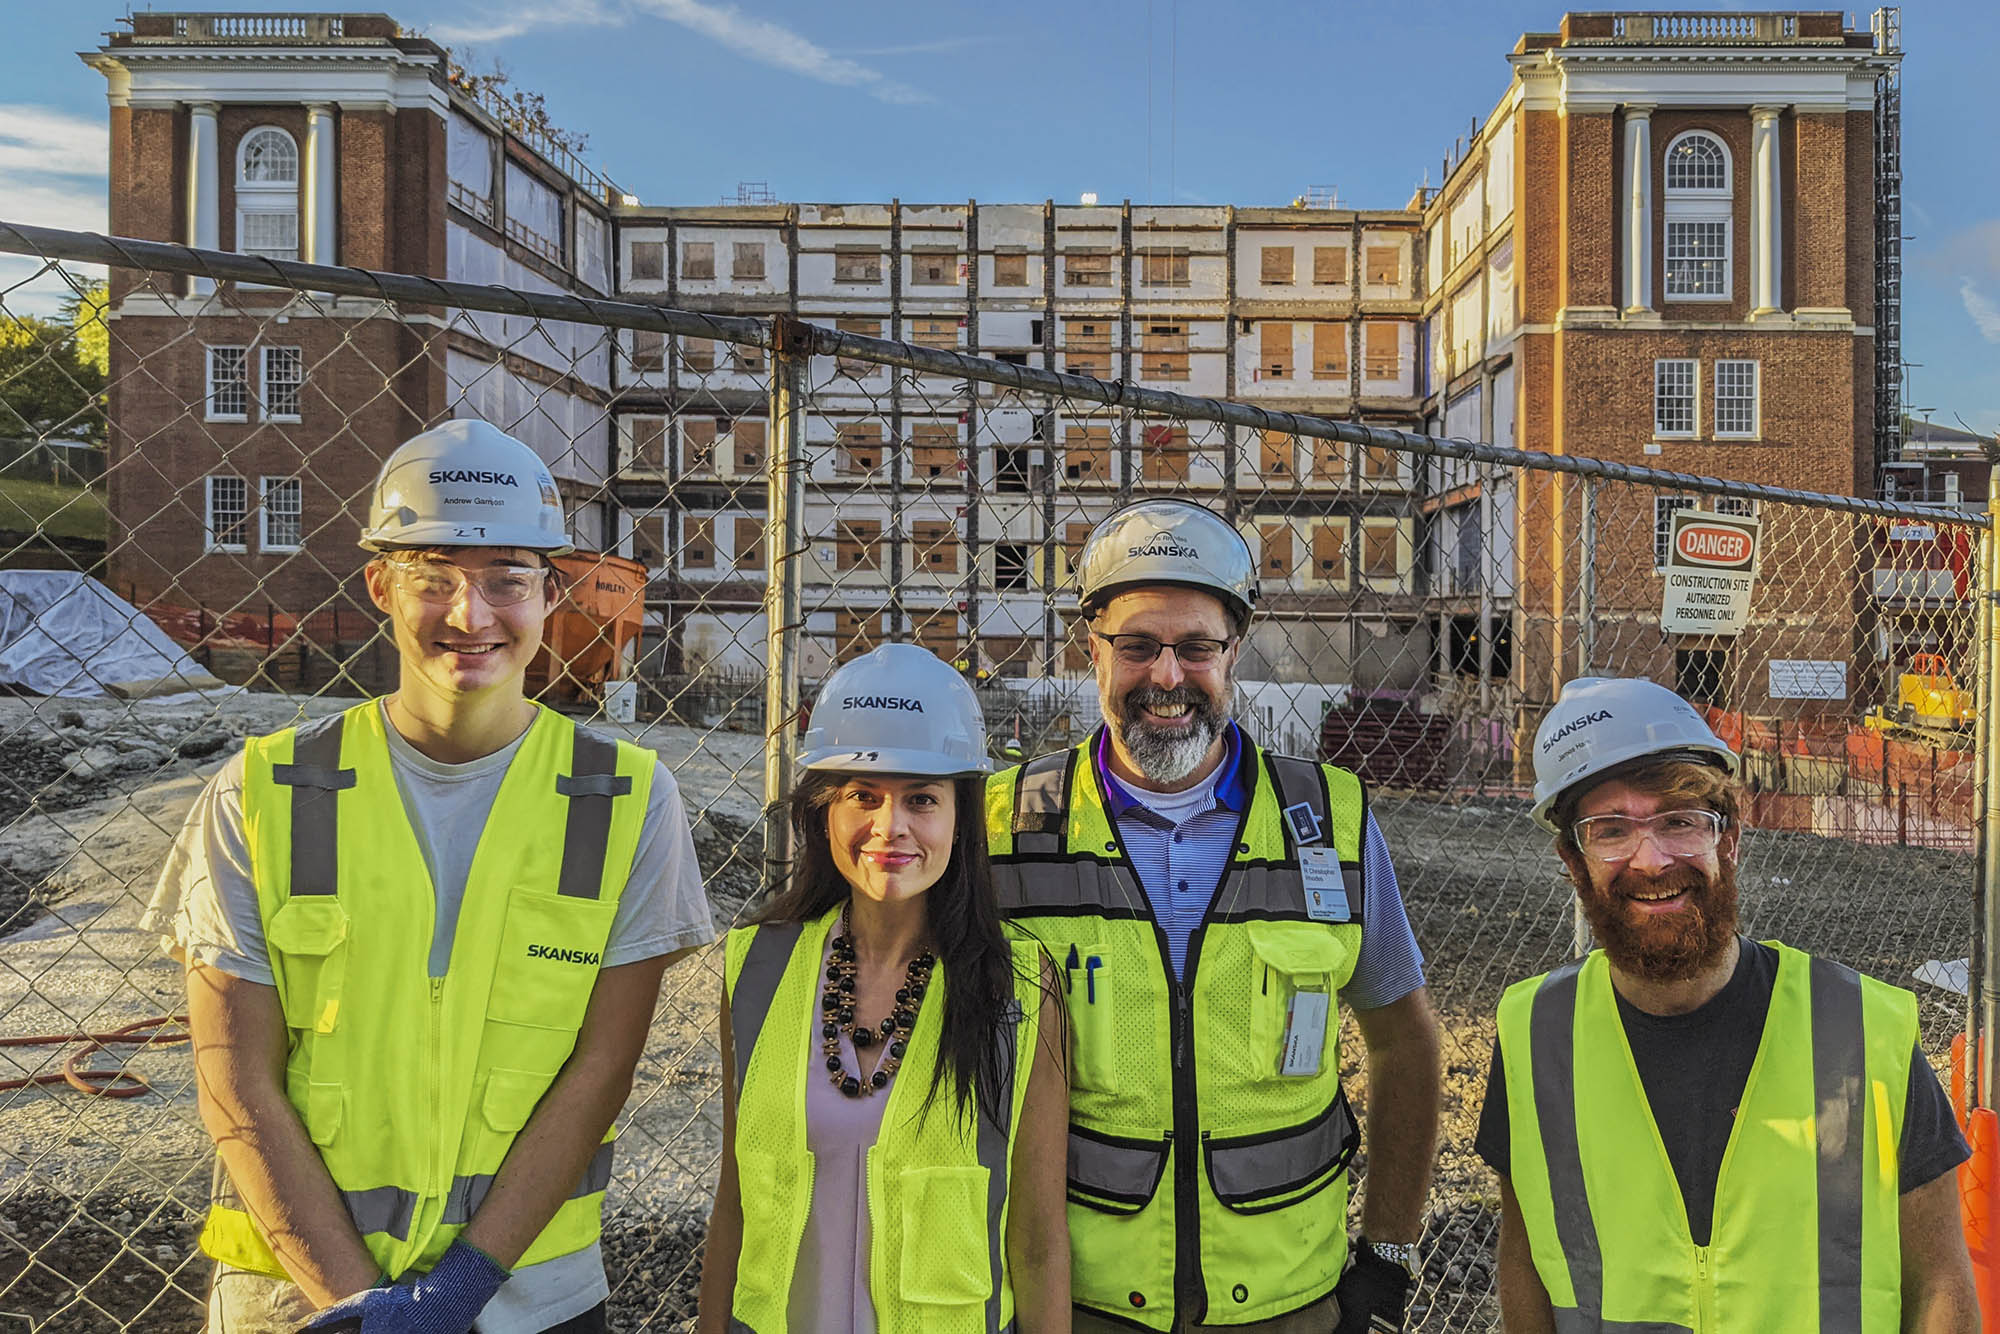 From left to rightAndrew Garnjost, Diana Duran, Chris Rhodes, James Hark standing outside of the Alderman Library construction